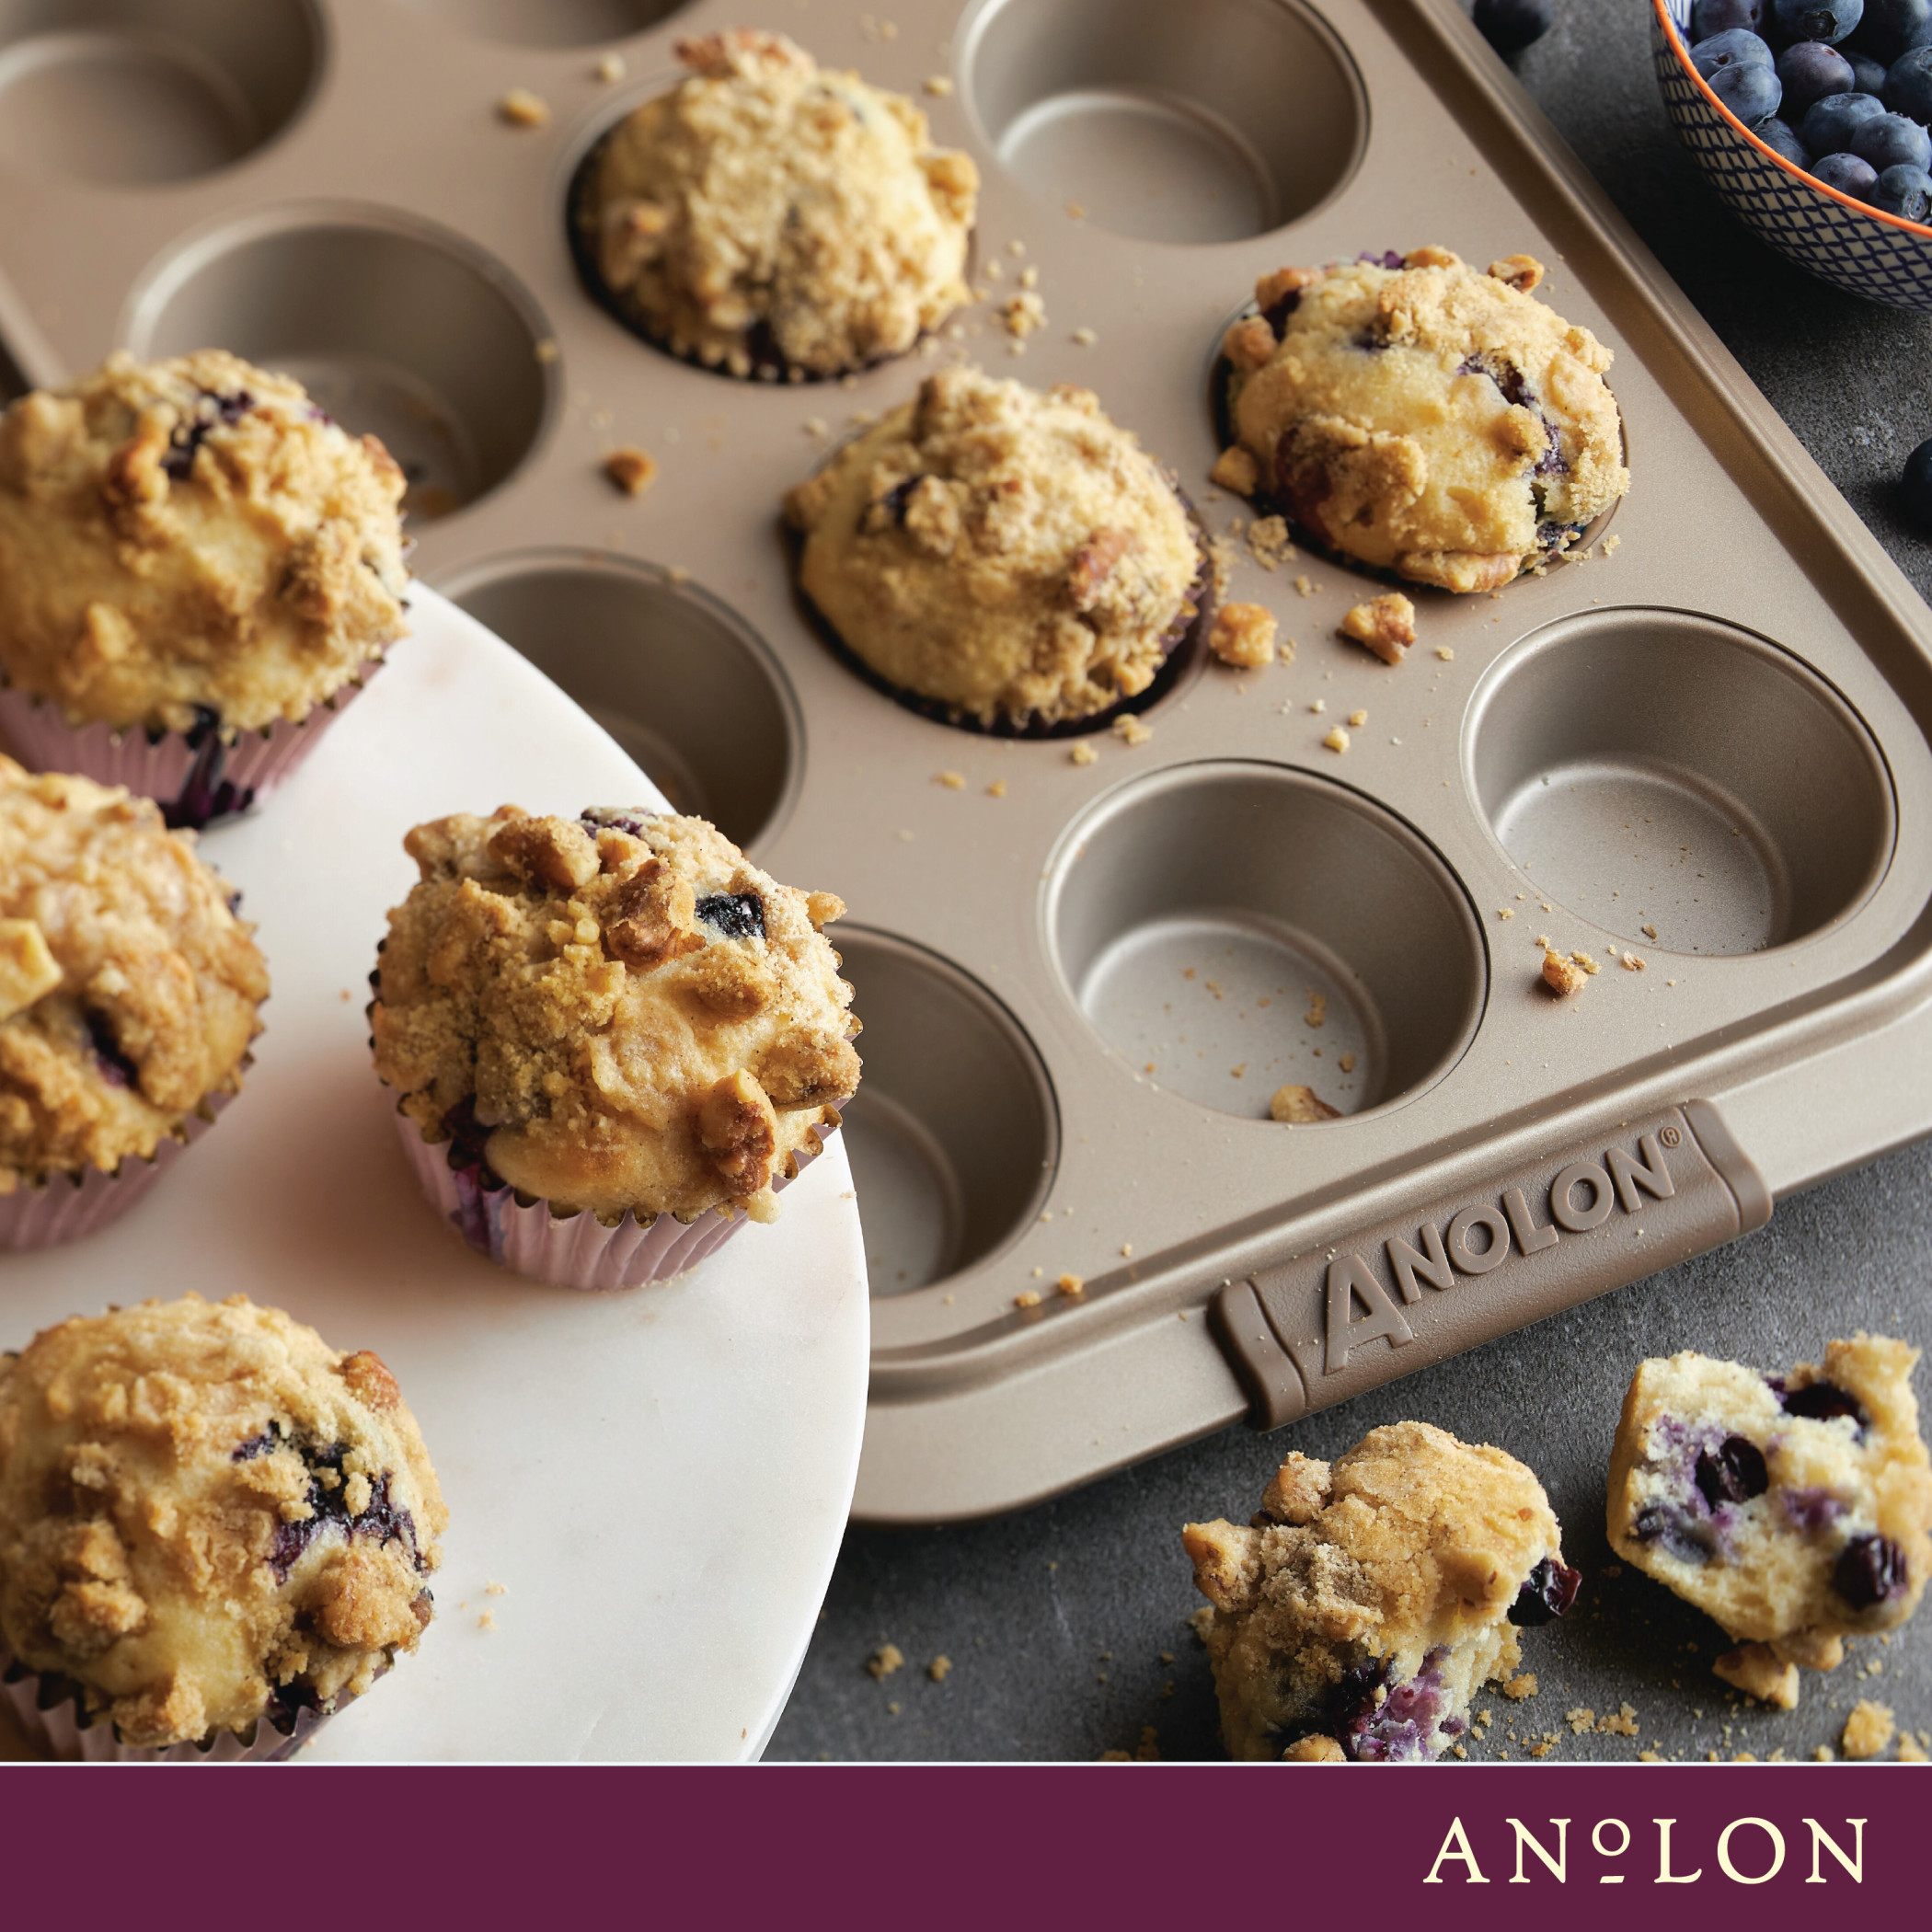 Anolon Advanced Bronze Nonstick Bakeware 12-Cup Muffin Pan with Silicone Grips - image 4 of 7